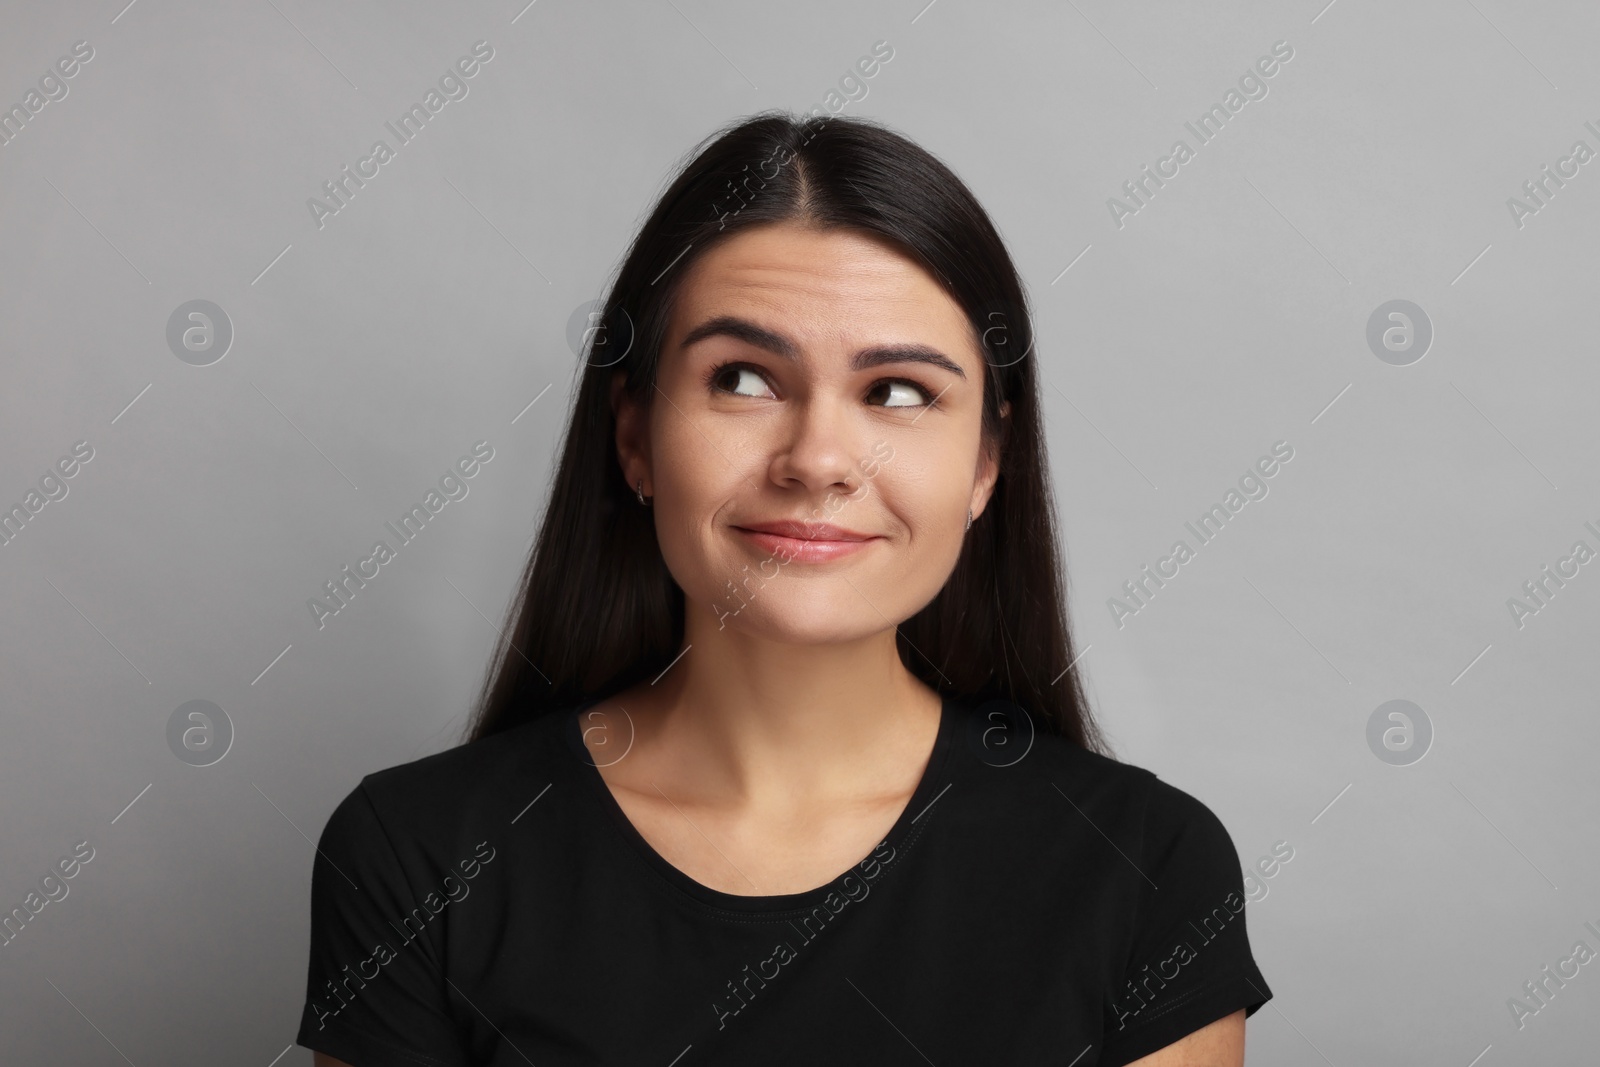 Photo of Personality concept. Emotional woman on grey background